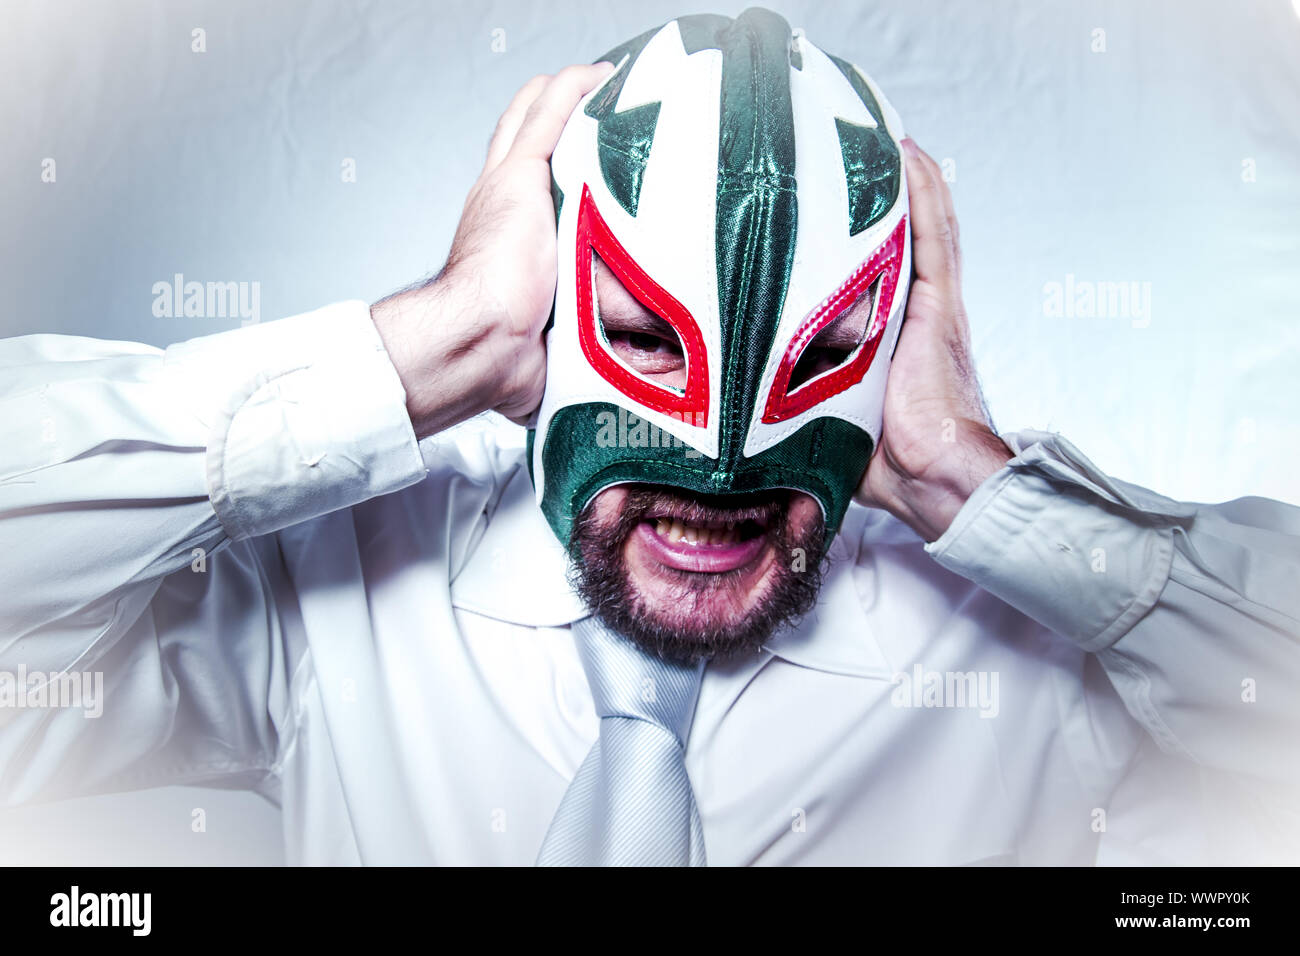 angry businessman with Mexican wrestler mask, expressions of anger and rage Stock Photo